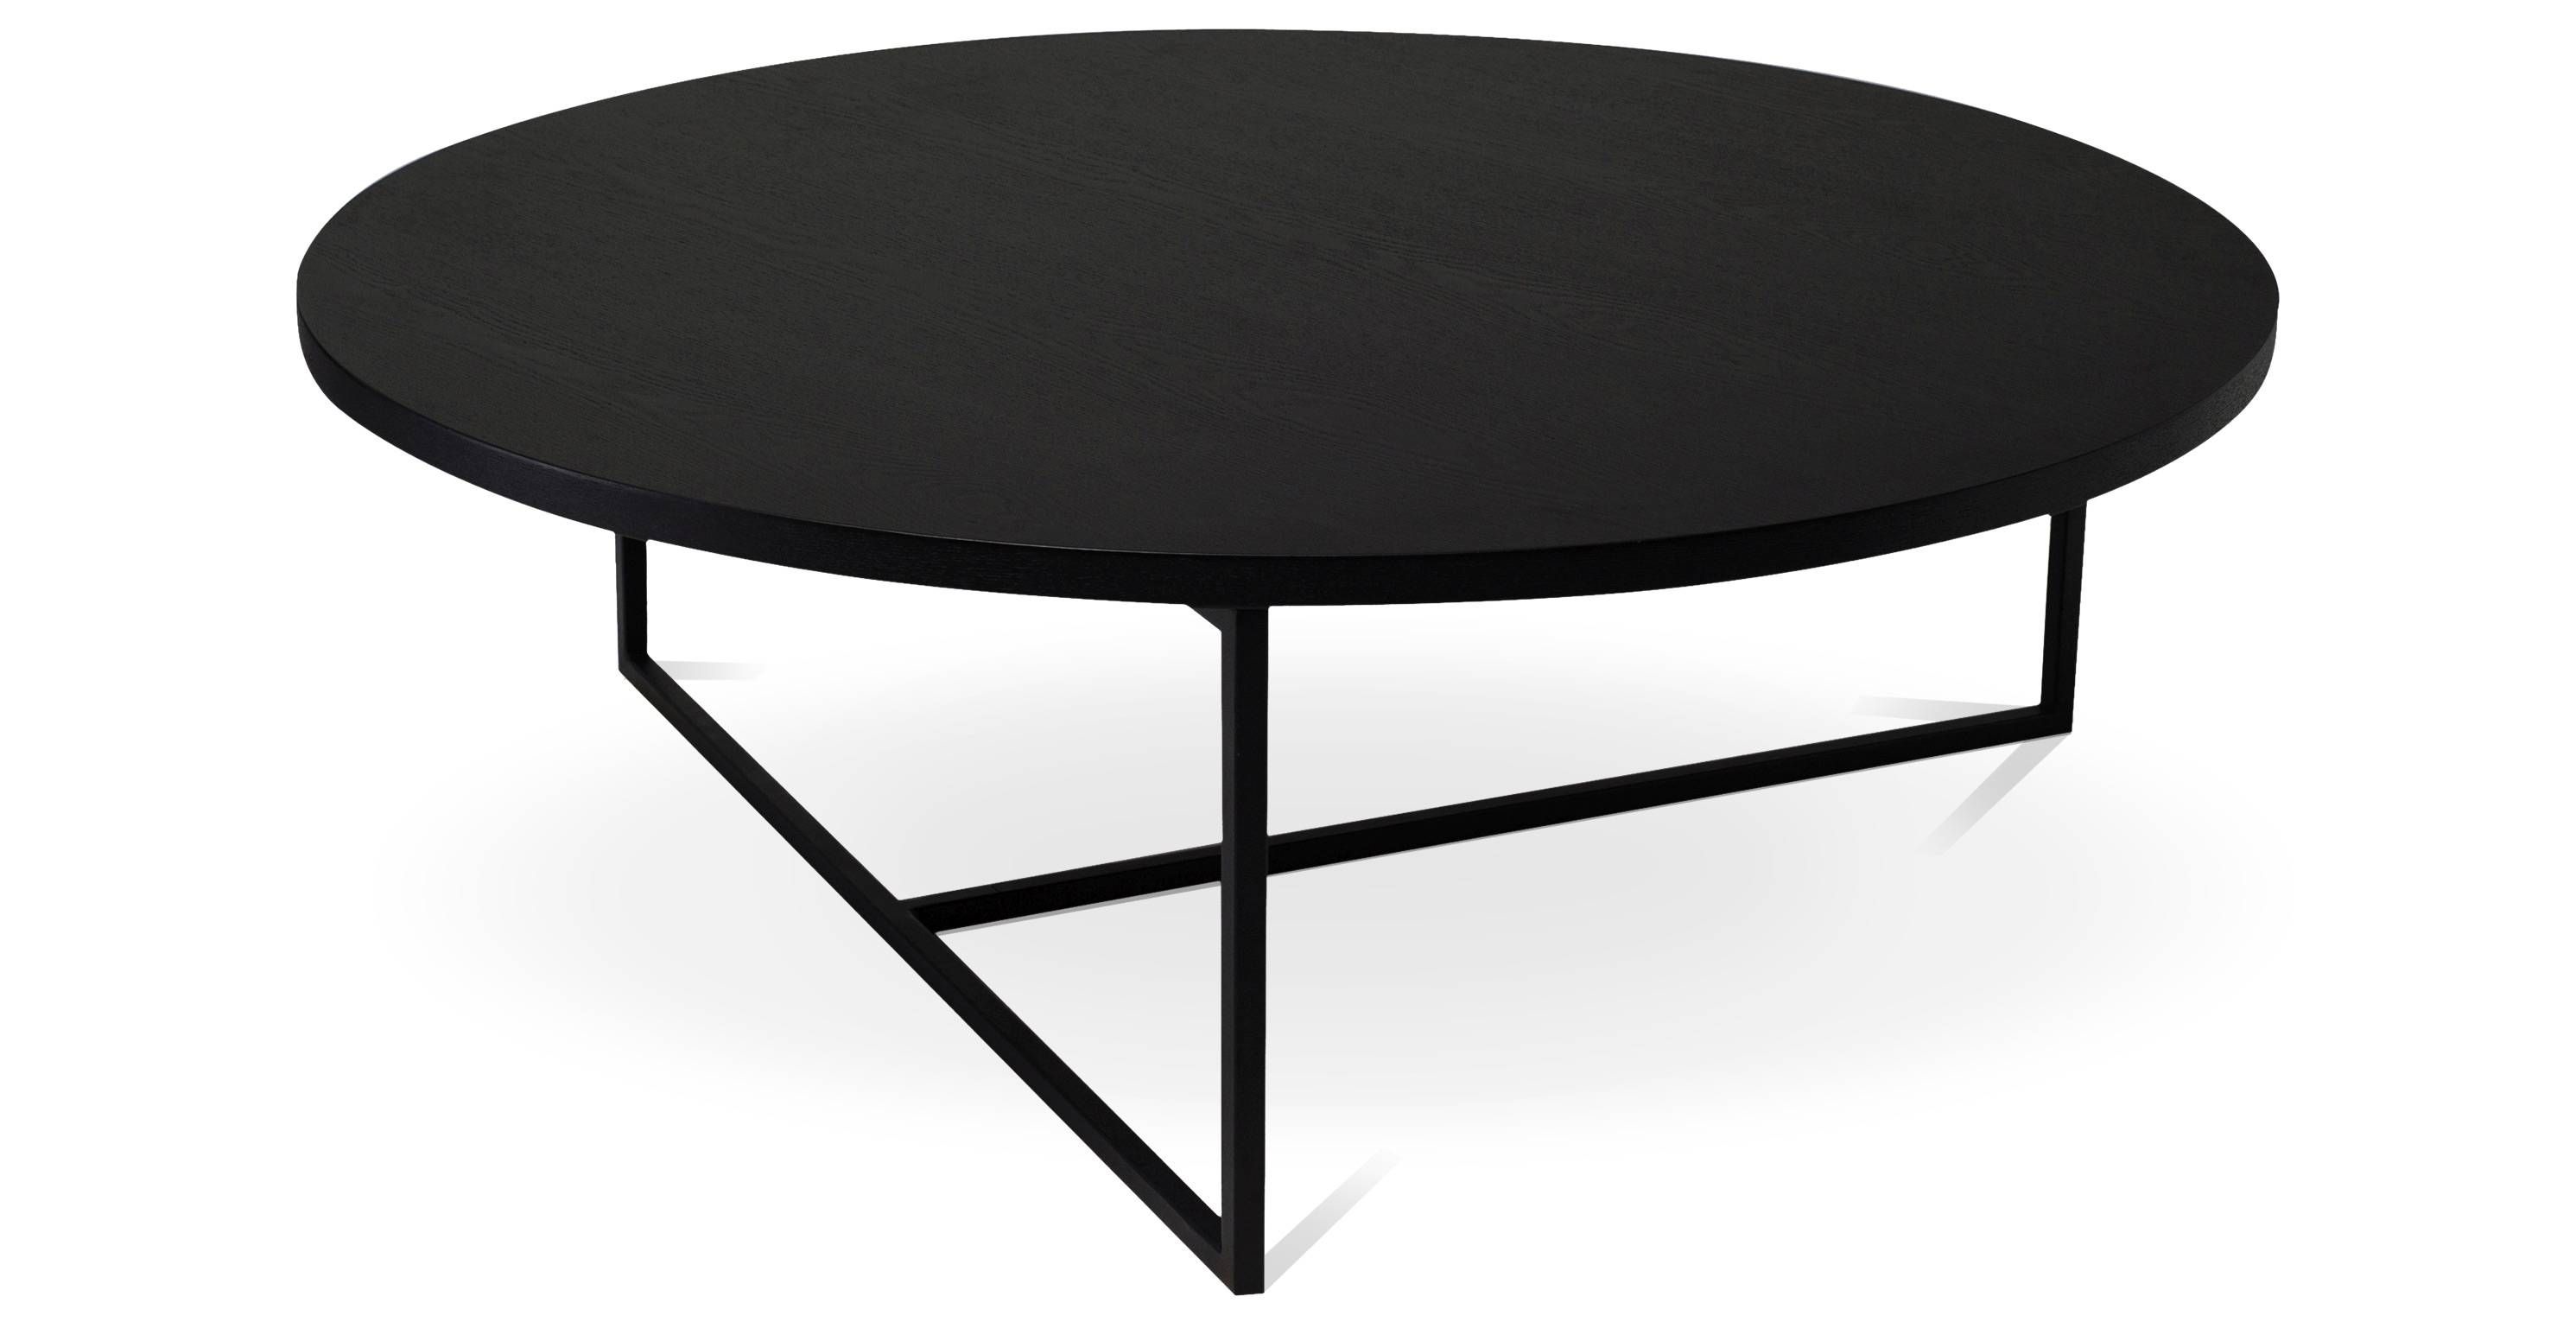 Coffee Table: Popular Round Black Coffee Table Design Ideas Round In Round Coffee Tables (View 21 of 30)